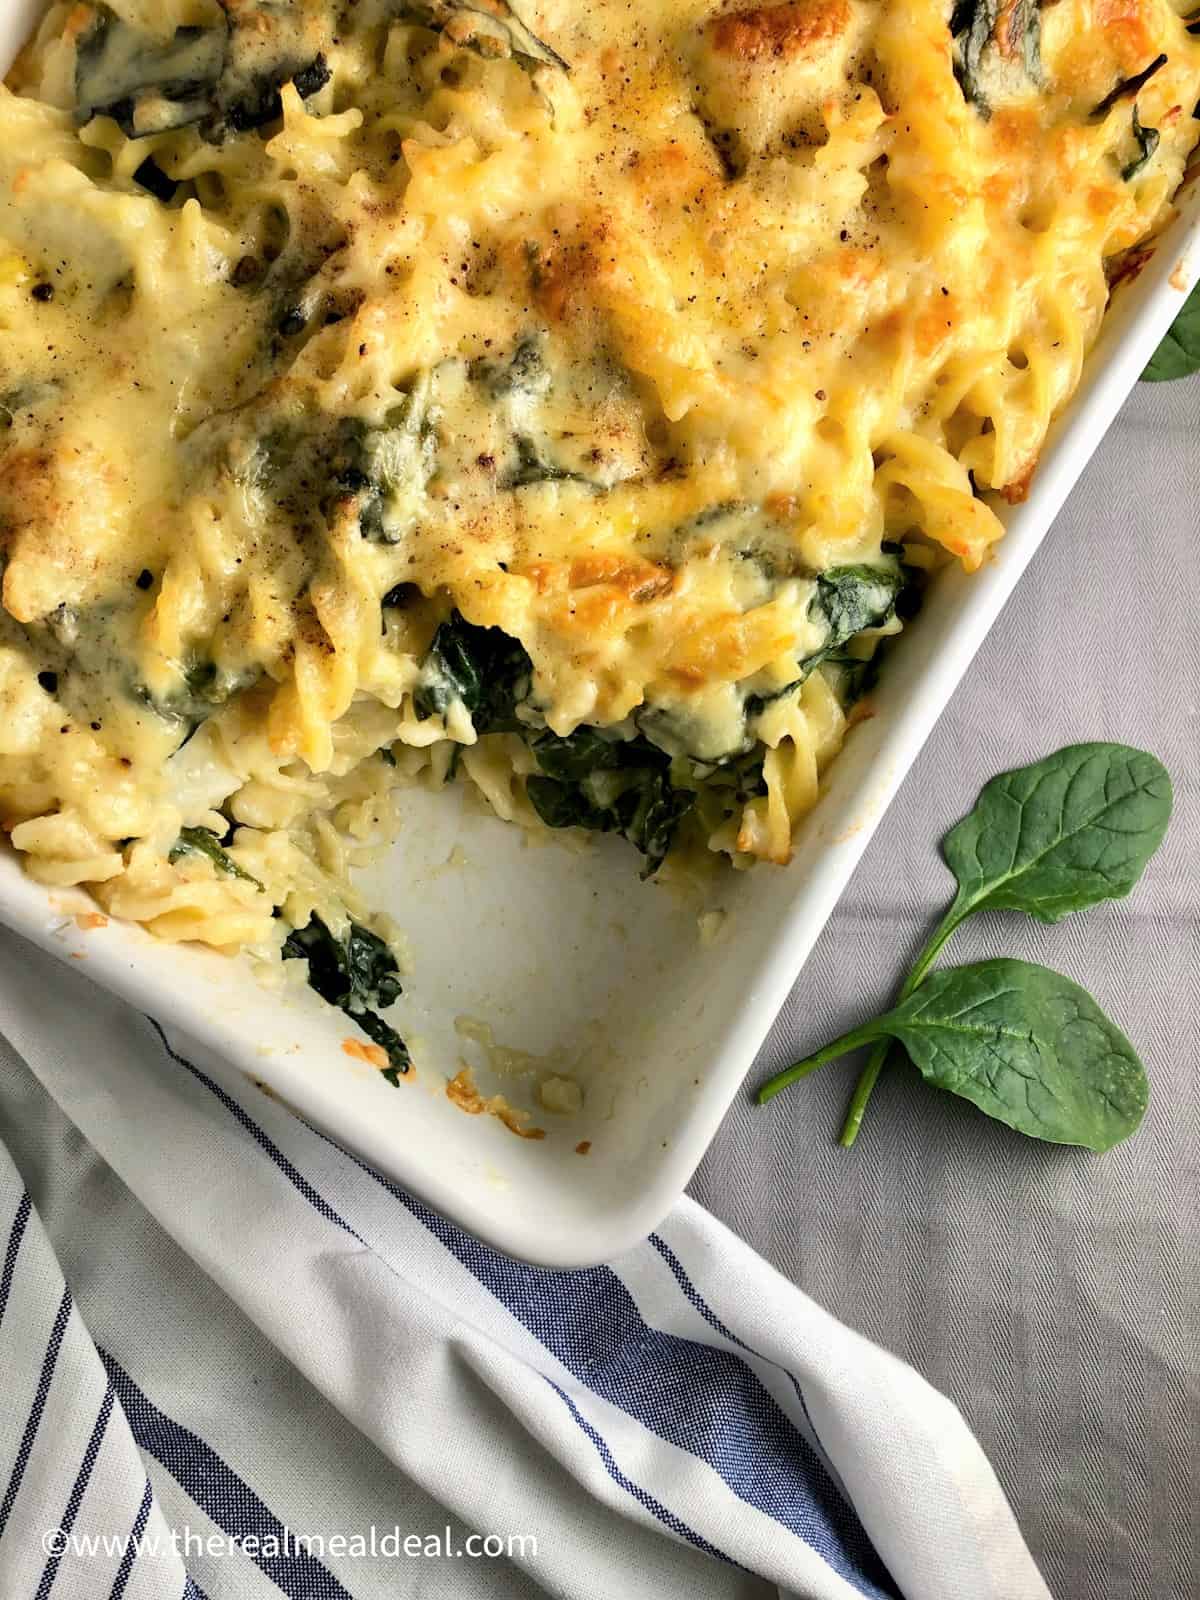 cauliflower cheese pasta bake in casserole dish with portion removed